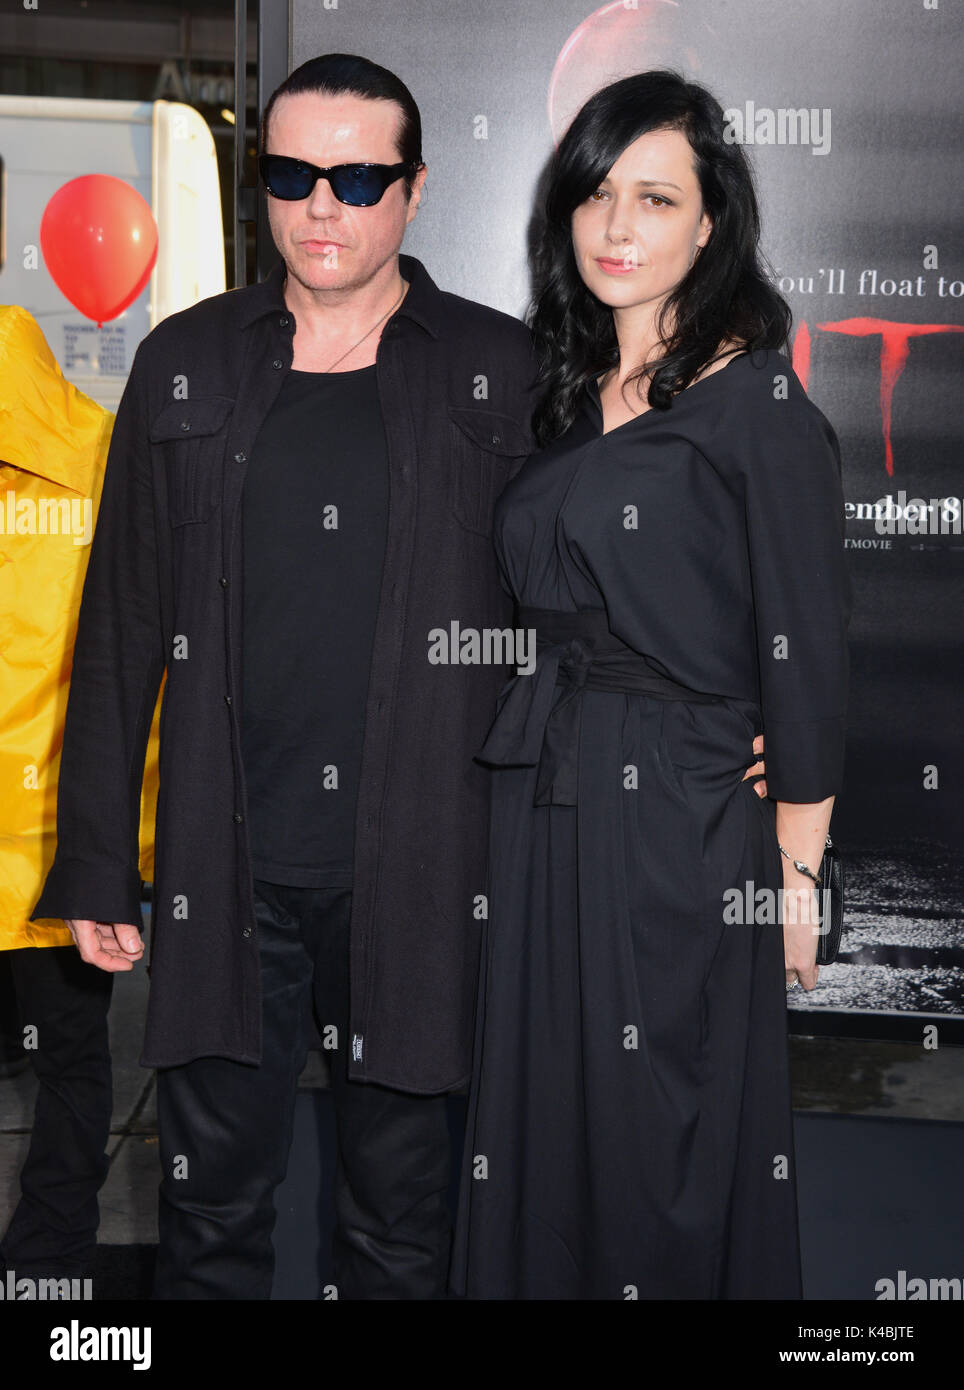 Los Angeles, USA. 05th Sep, 2017. Ian Astbury and wife arriving at the IT You'll Float Too Premiere at the TCL Chinese Theatre in Los Angeles. September 5, 2017. Credit: Tsuni/USA/Alamy Live News Stock Photo